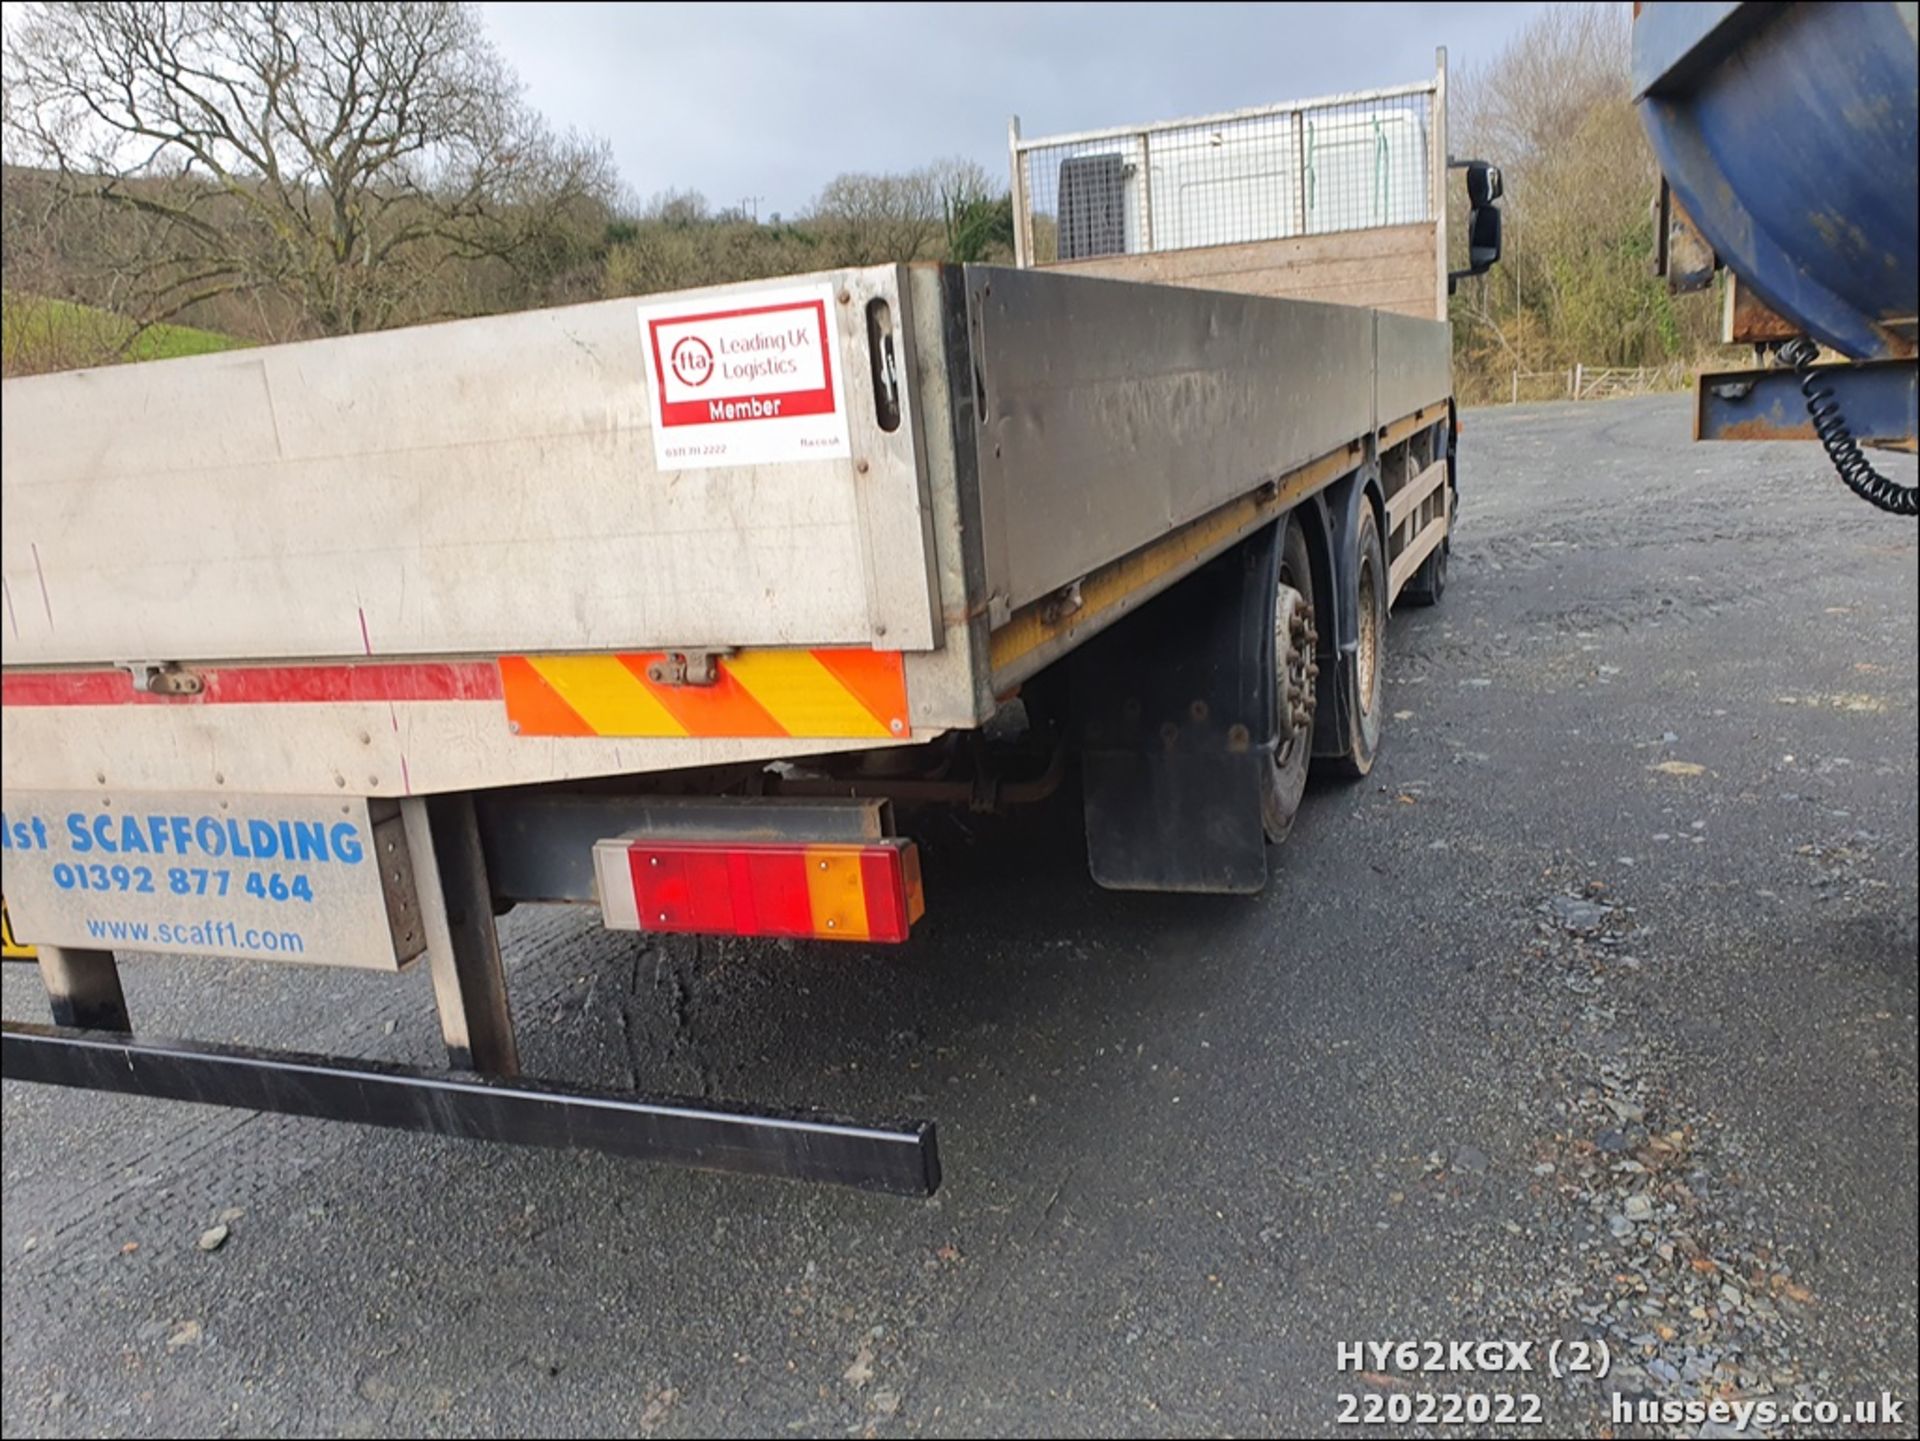 12/62 IVECO STRALIS - 7790cc 2dr Flat Bed (White) - Image 18 of 28